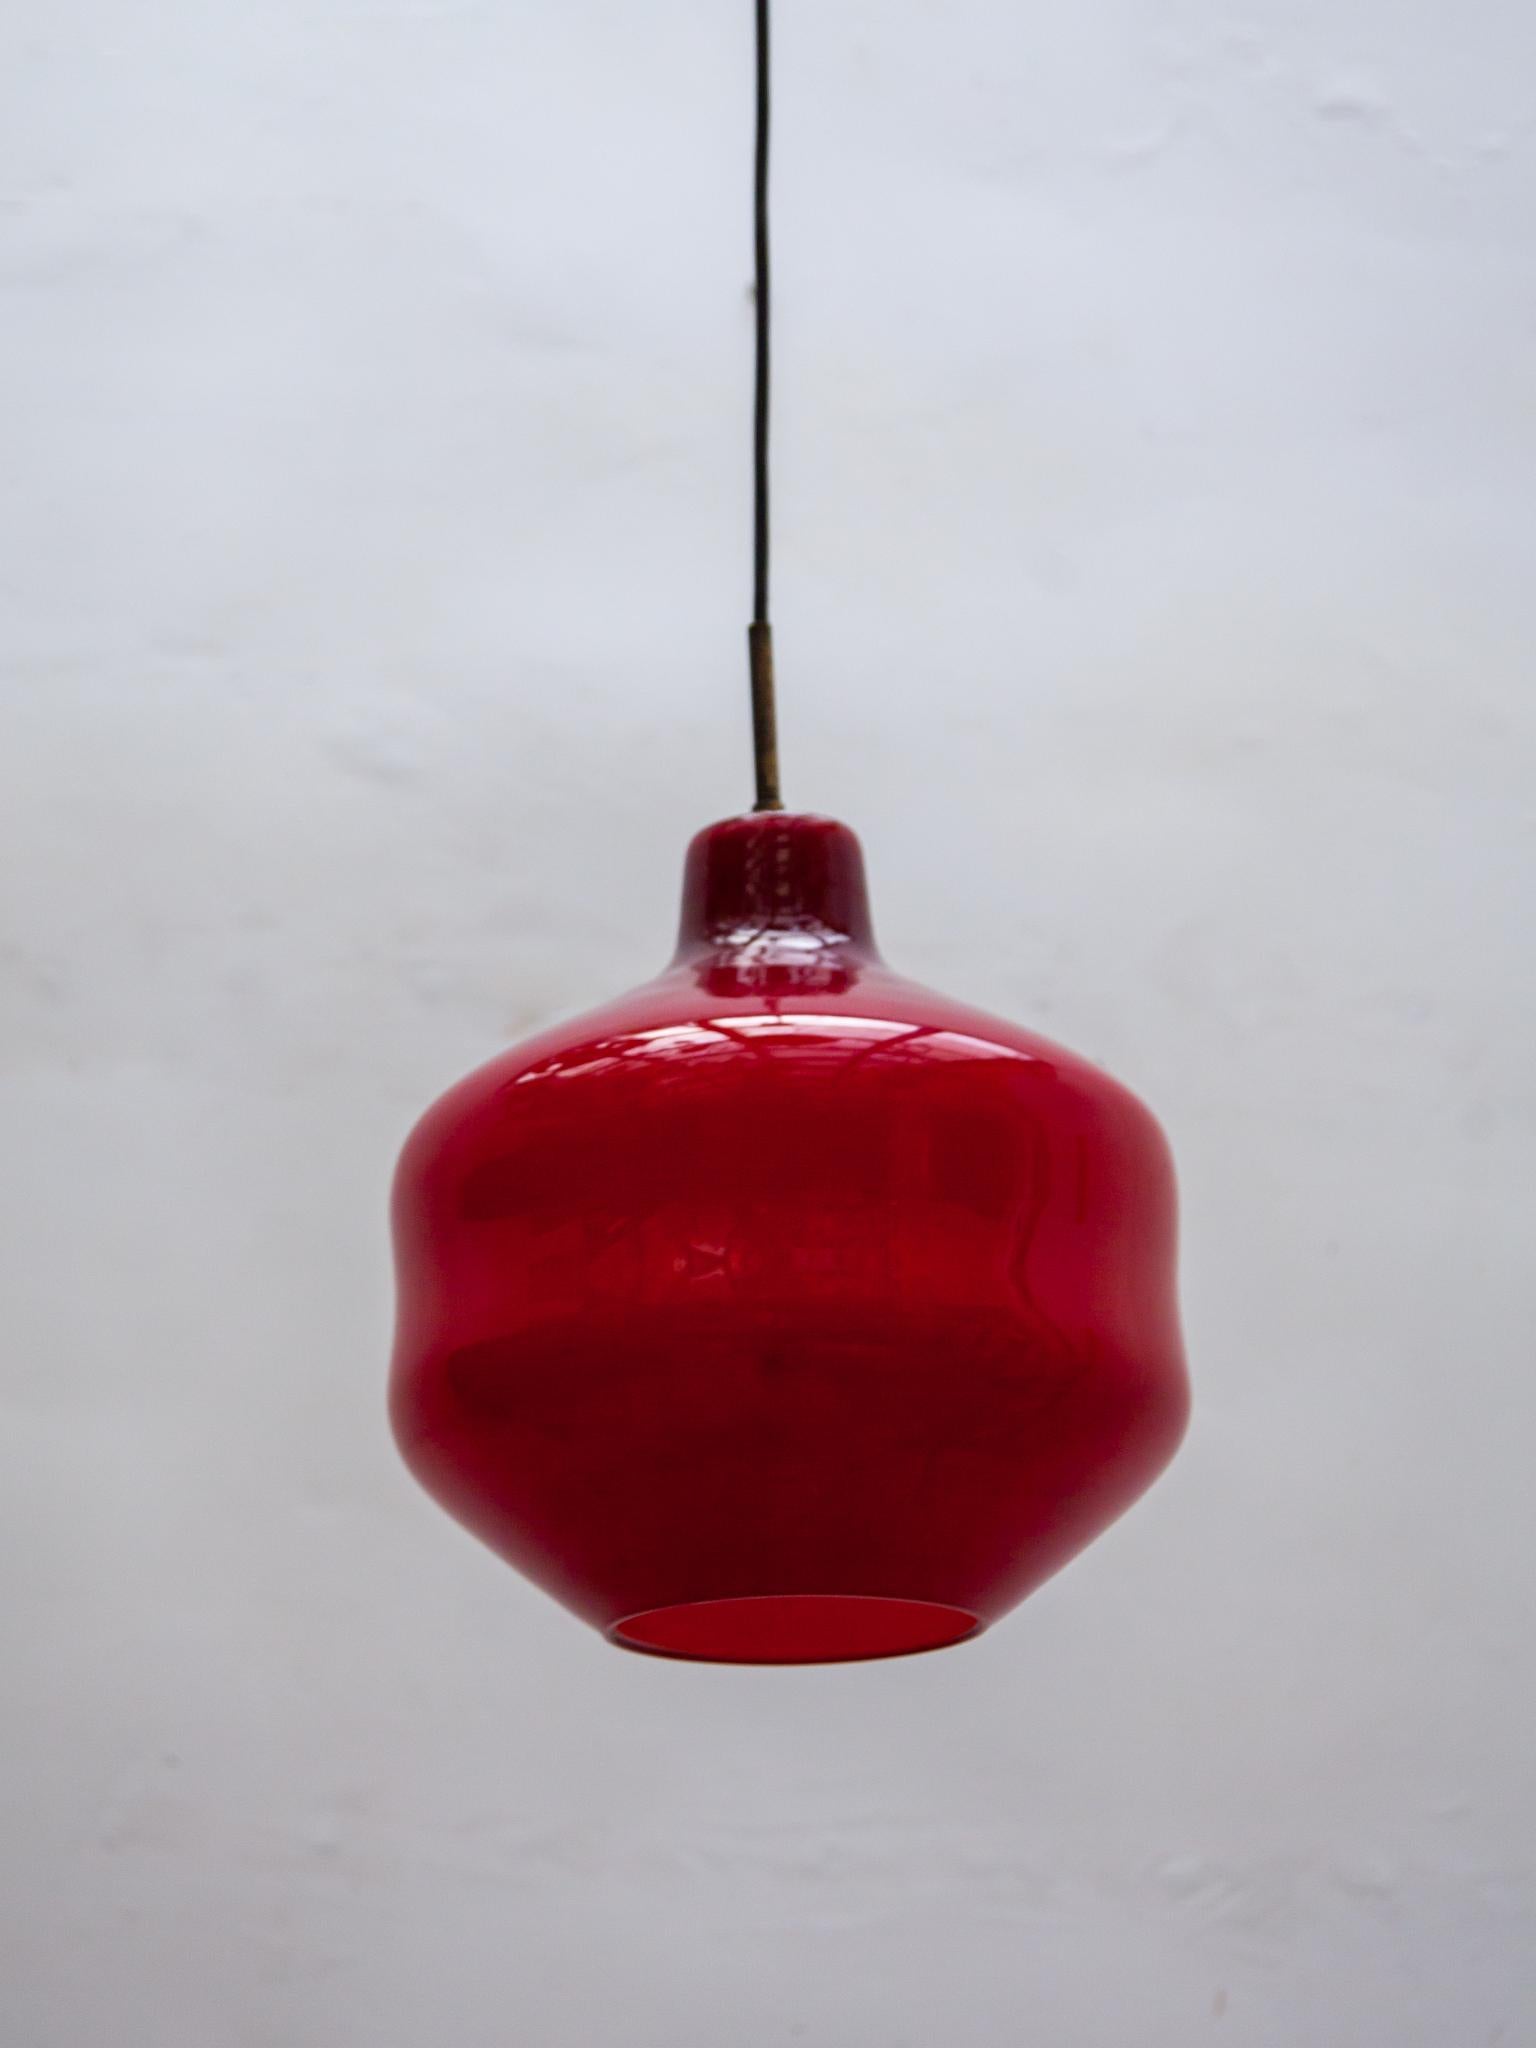 Holmgaard pendant lamp opal red glass in very good condition. Original canopy. Beautiful deep red color.

A very nice accent of light in your interior.